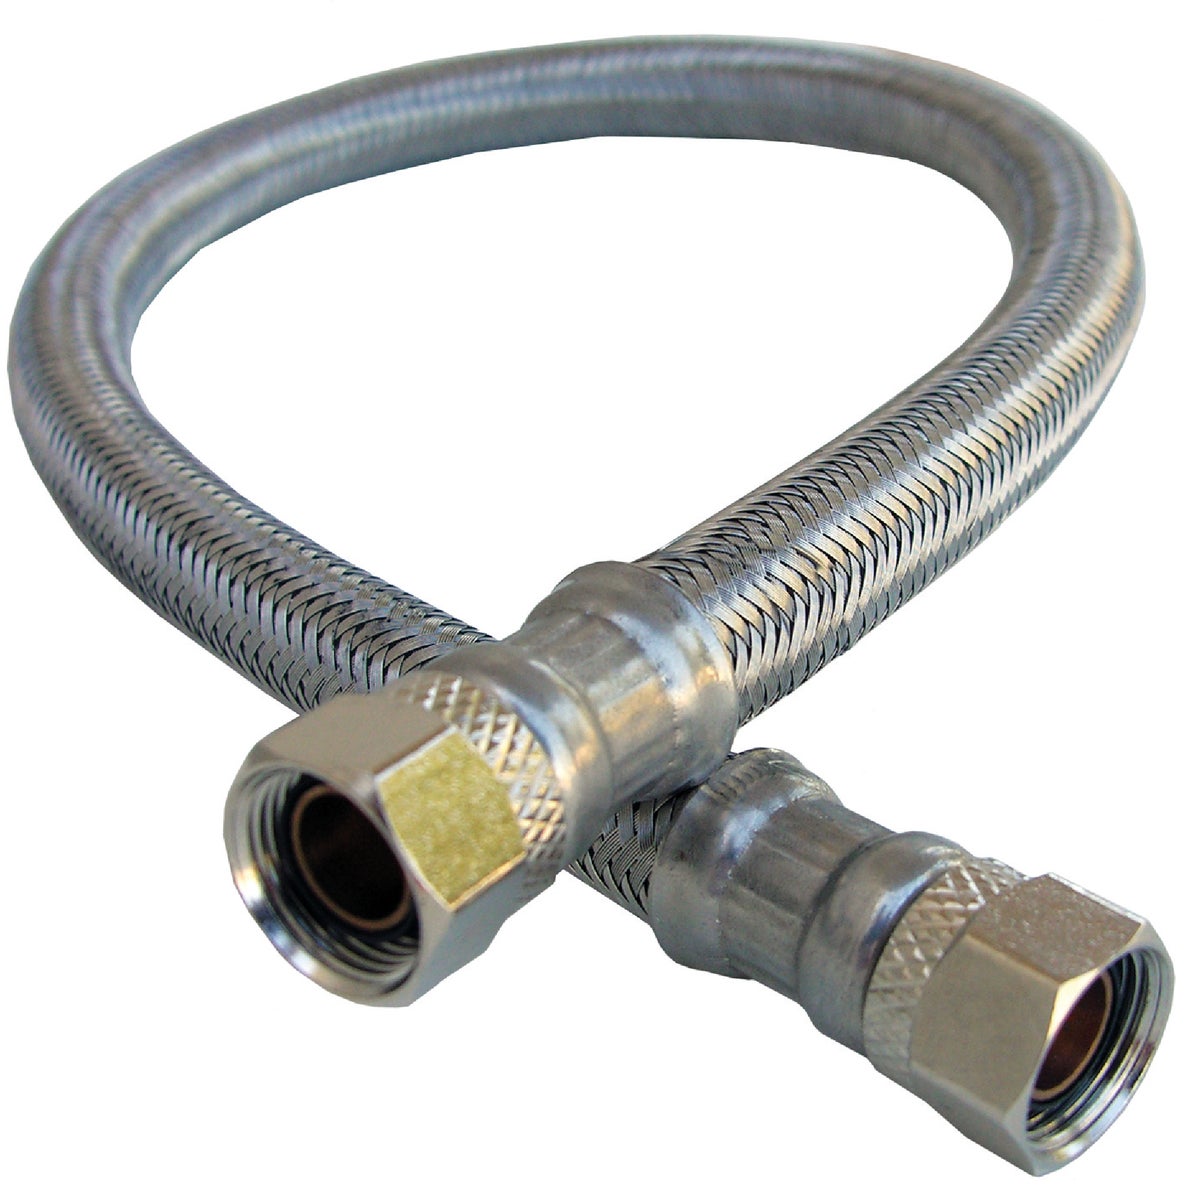 Lasco 3/8 In.C x 3/8 In.C x 16 In. L Braided Stainless Steel Flex Line Appliance Water Connector